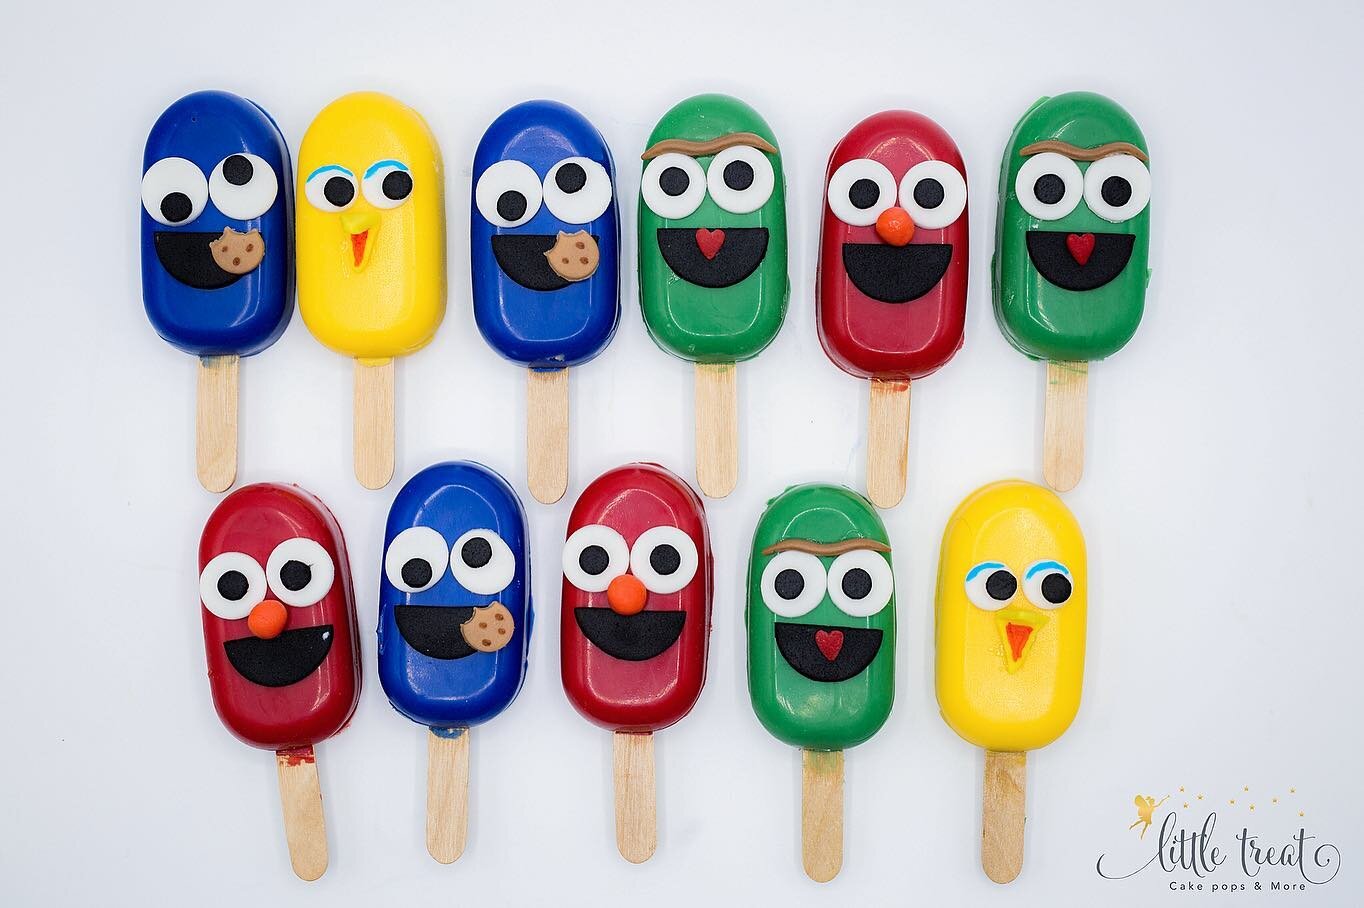 🎶 Sunny day ☀️ 
Can you tell me how to get?
How to get to Sesame Street? 🎵🎶 
.
.
#cakepops #sesamestreet #treats  #cookiemonster #bigbird #elmocakepops #instacakepops #seasamestreetcakepops #sesamestreetparty #cupcakes #sweettooth #event #party #d